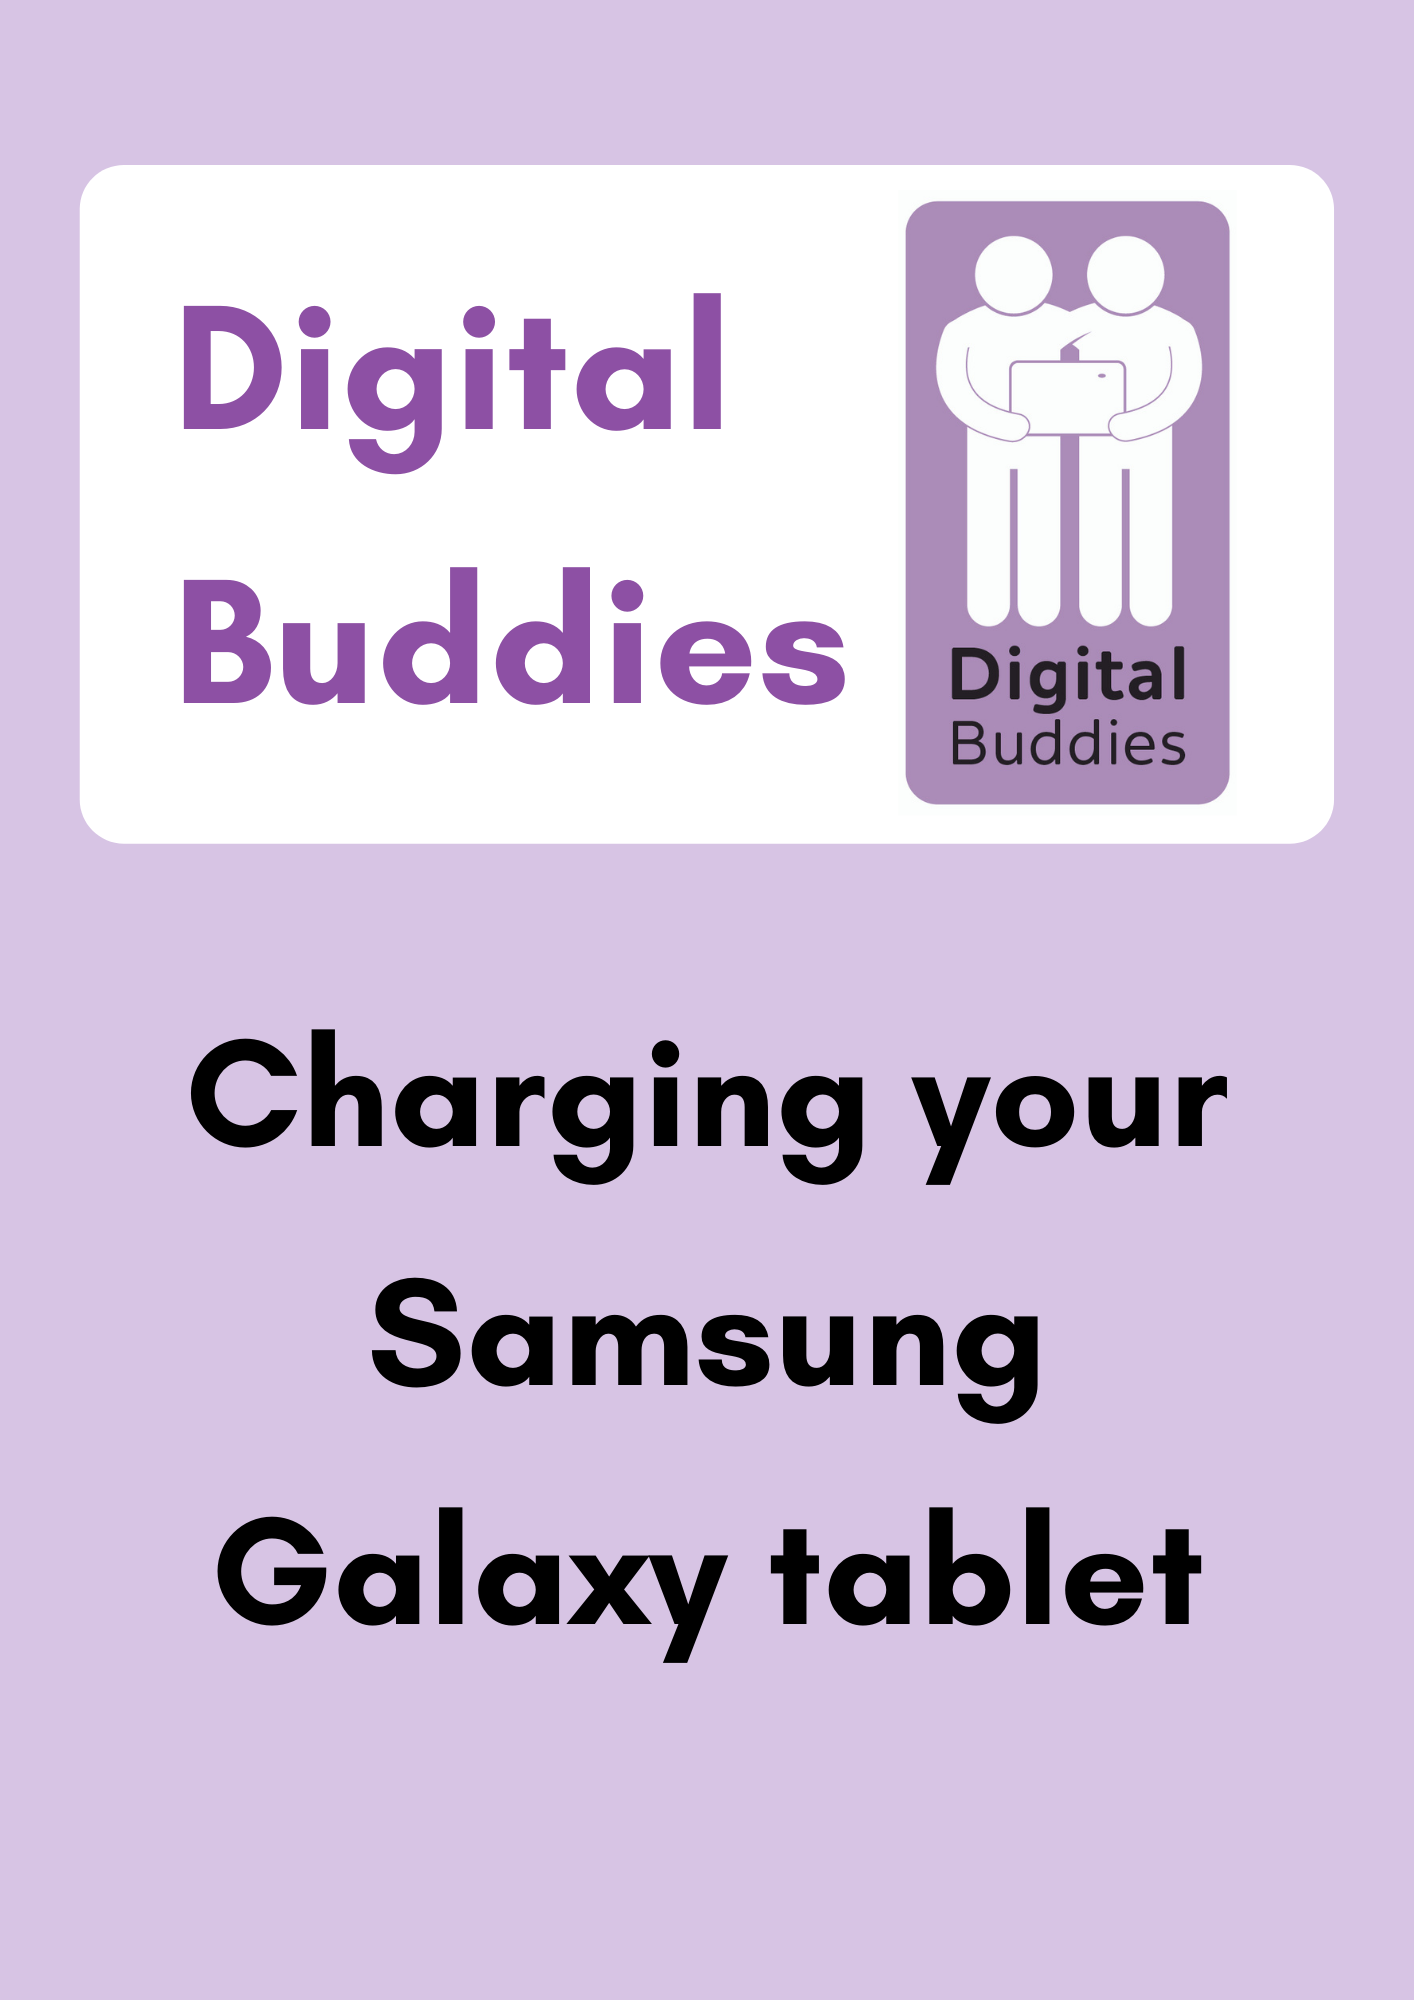 Charging your Samsung Galaxy tablet